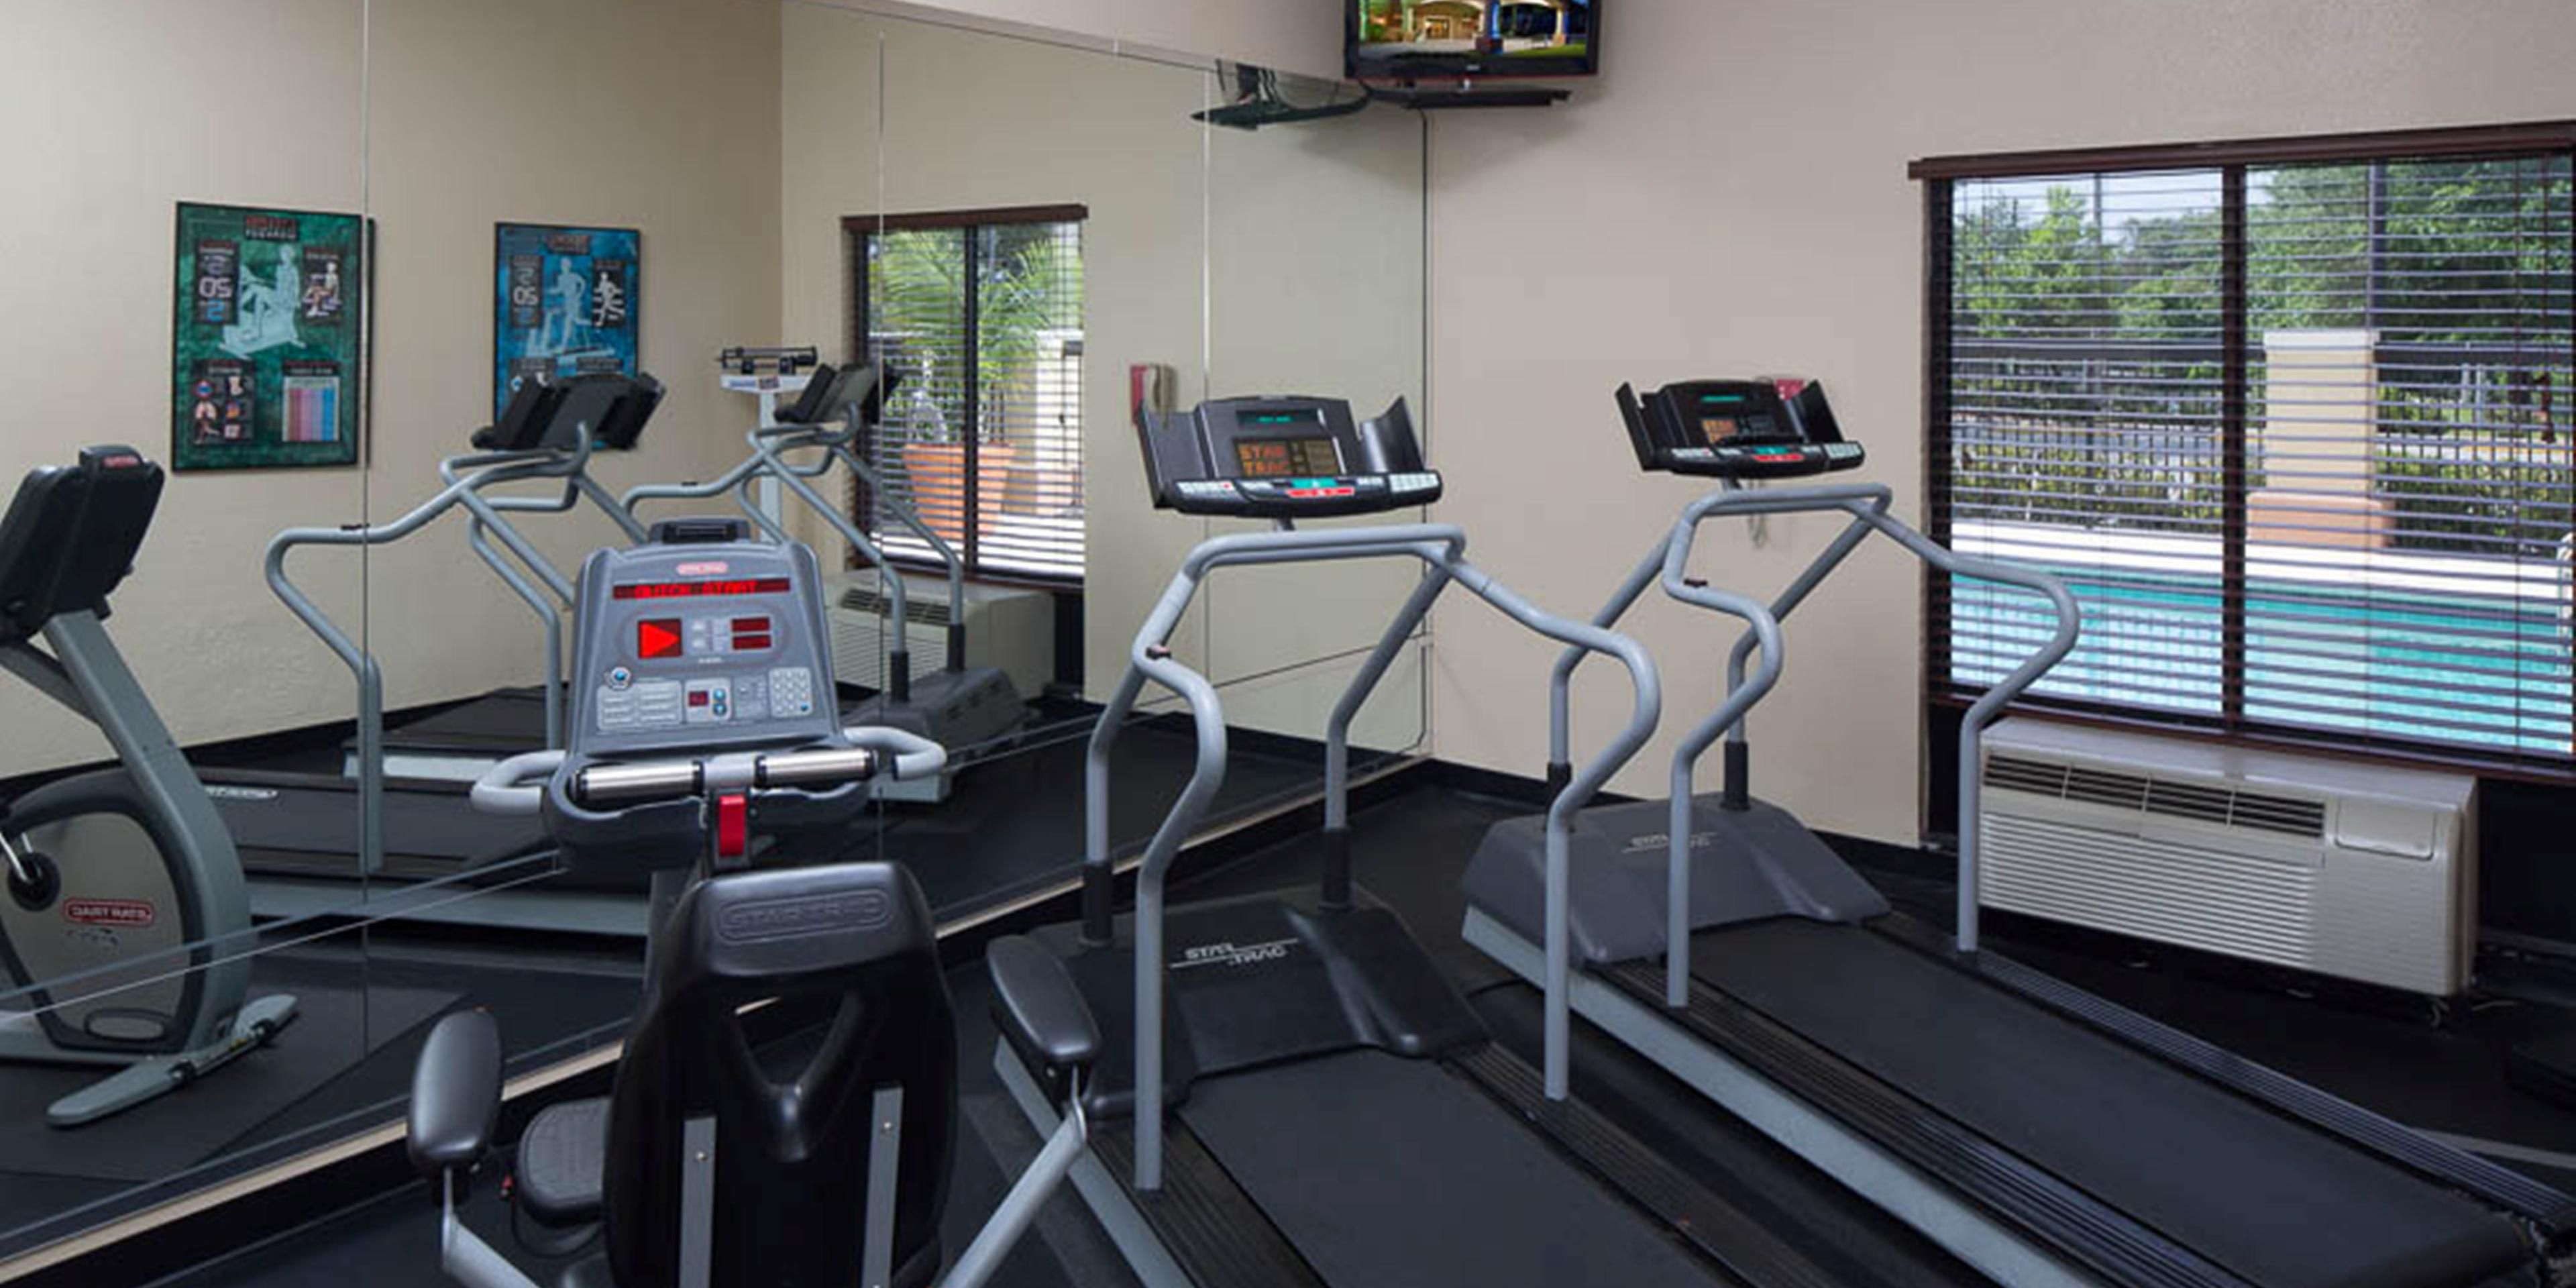 Enjoy our 24 hour fitness center, so you can get all your exercise in, even while away from home. 